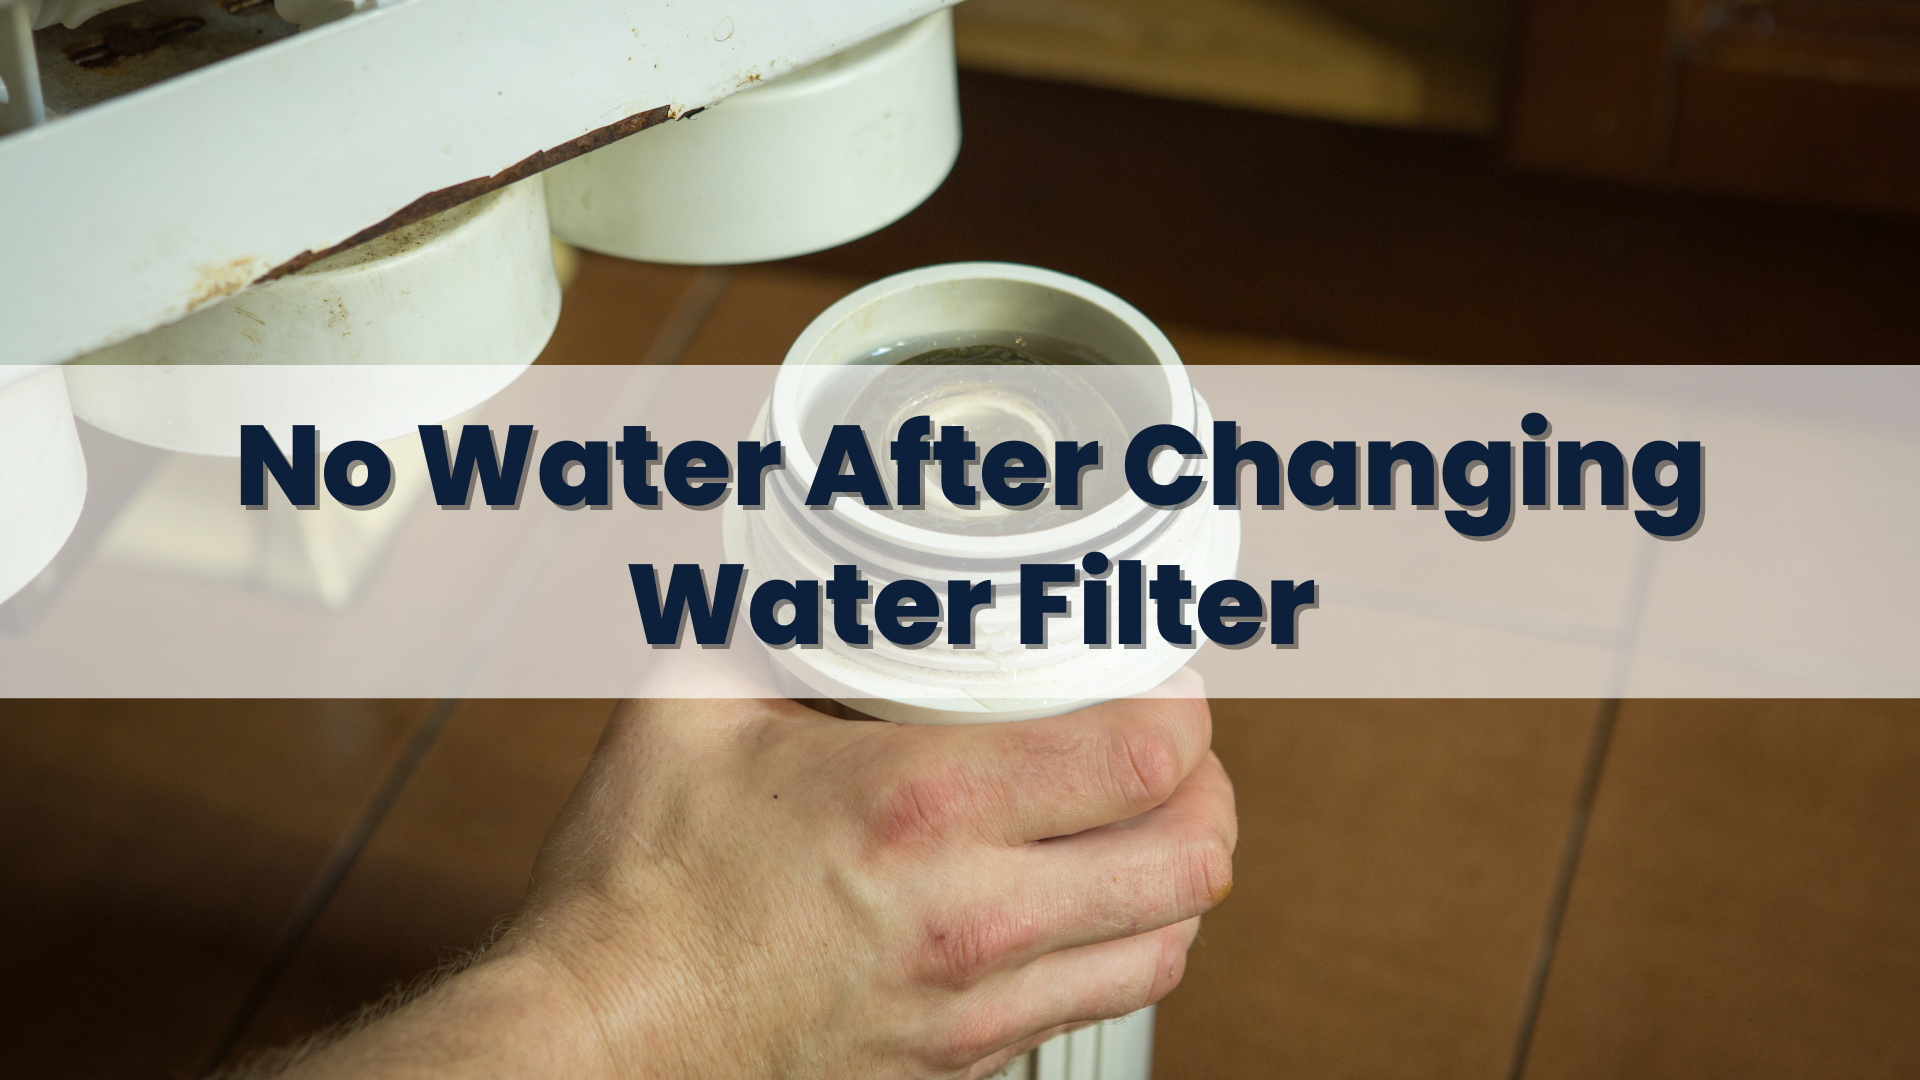 No water after changing water filter